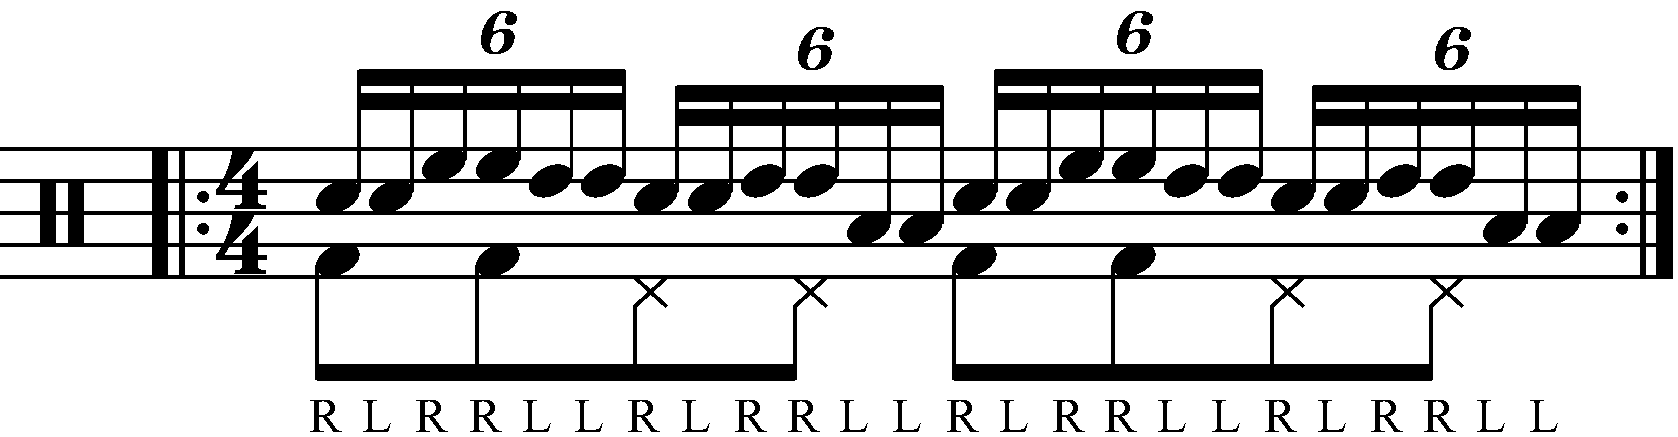 Paradiddle Diddle with moving double strokes